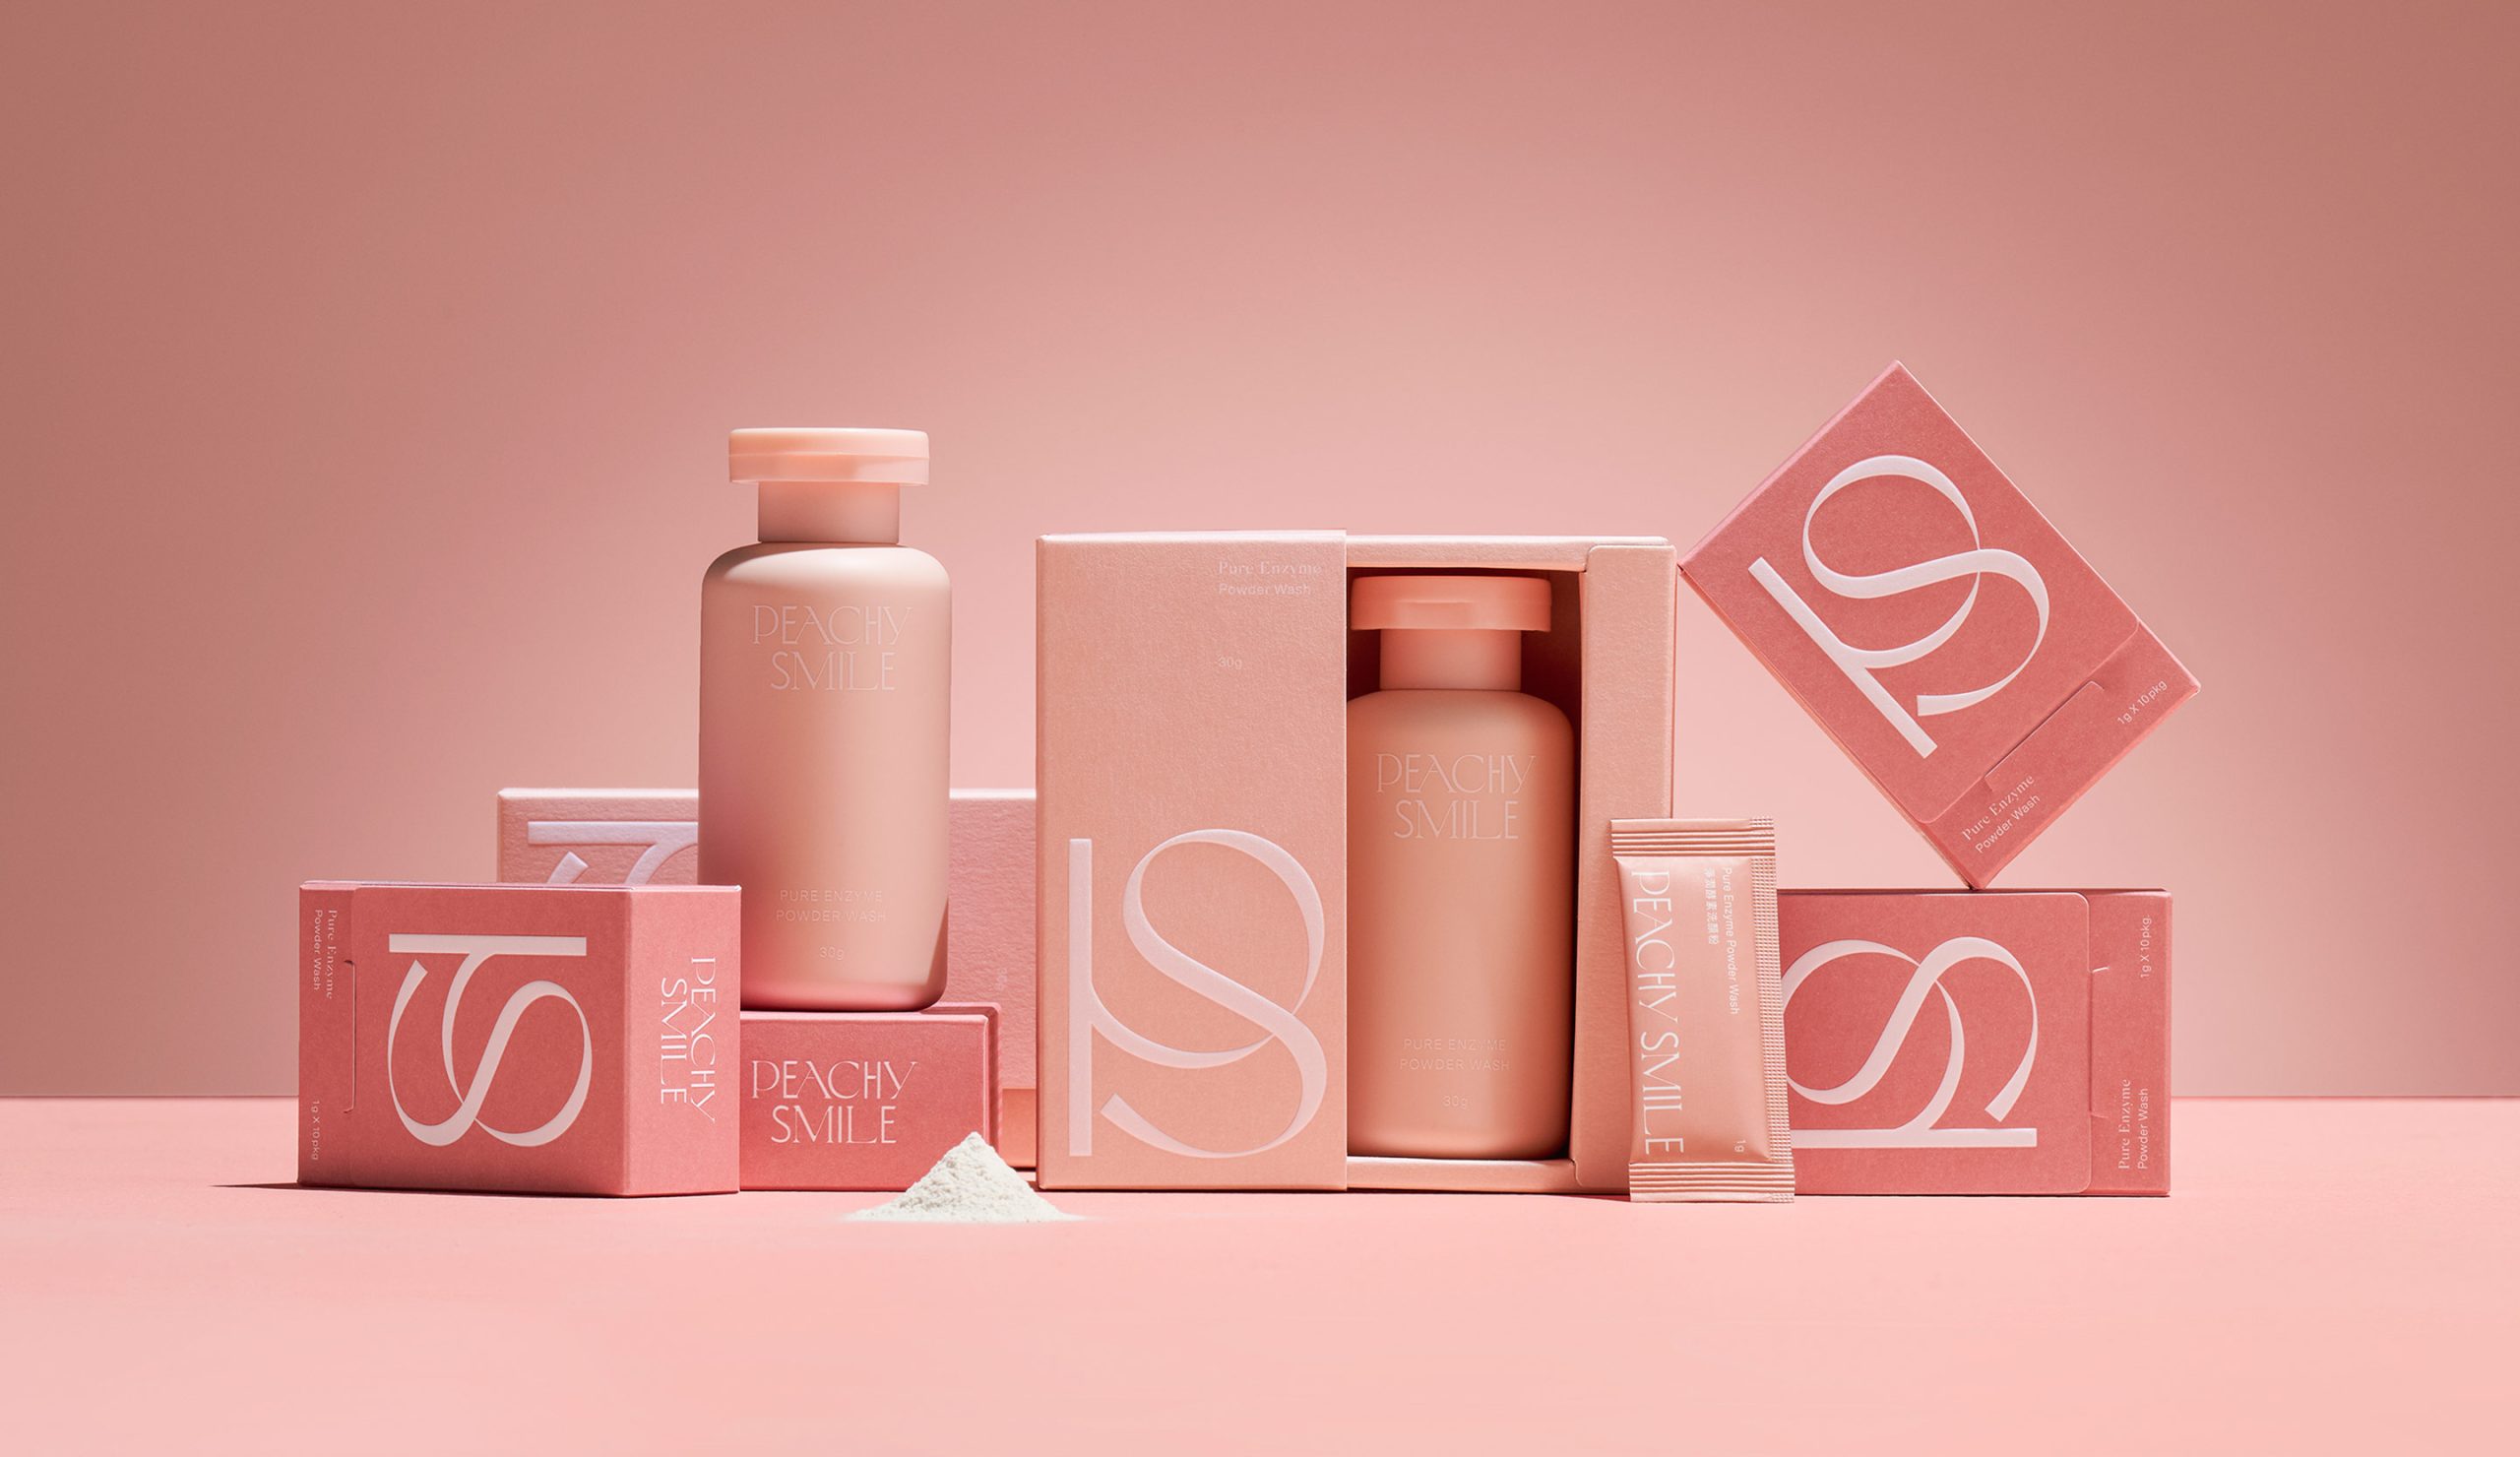 Peachy Smile Makes a Bid for Shelfies with Charming Packaging from Transform Design